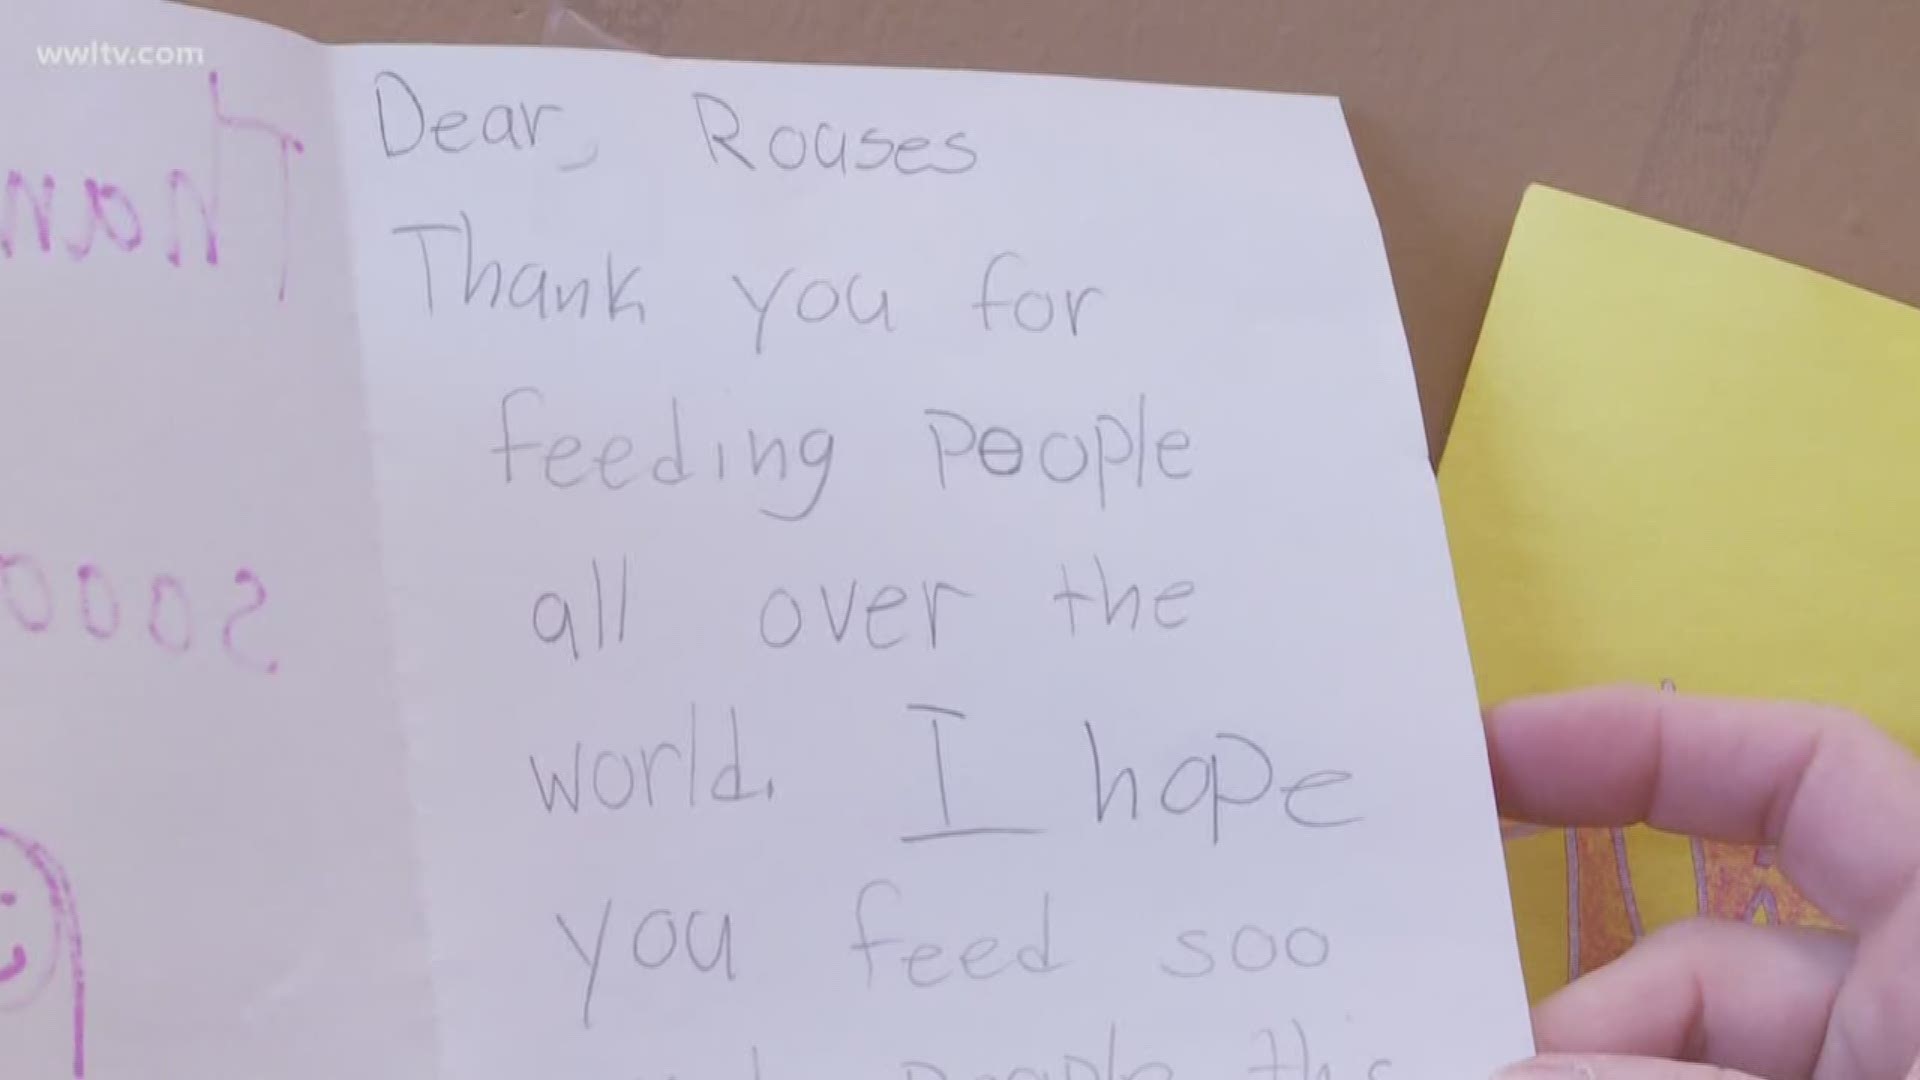 Children across the Northshore are showing their thanks to the workers keeping us fed during the coronavirus crisis.